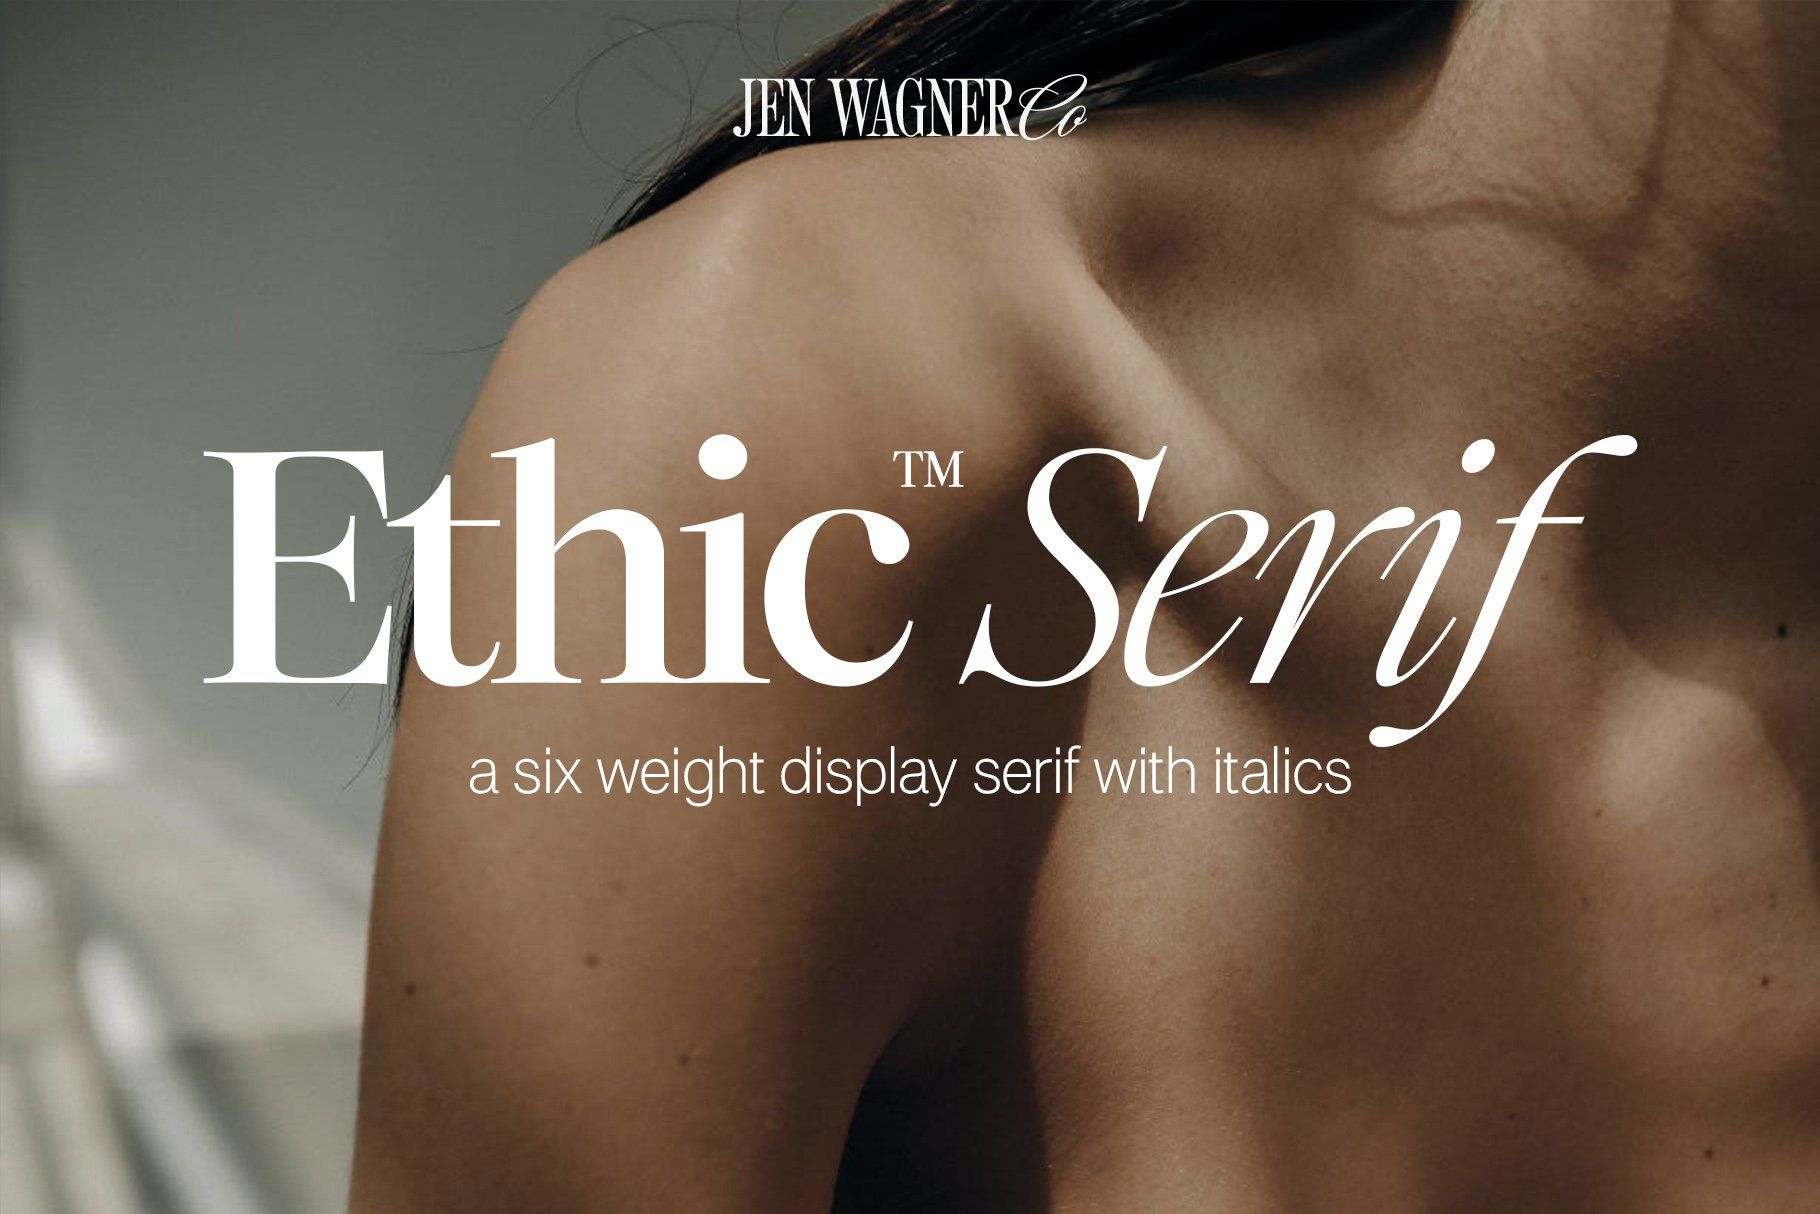 A six weight display serif with italics